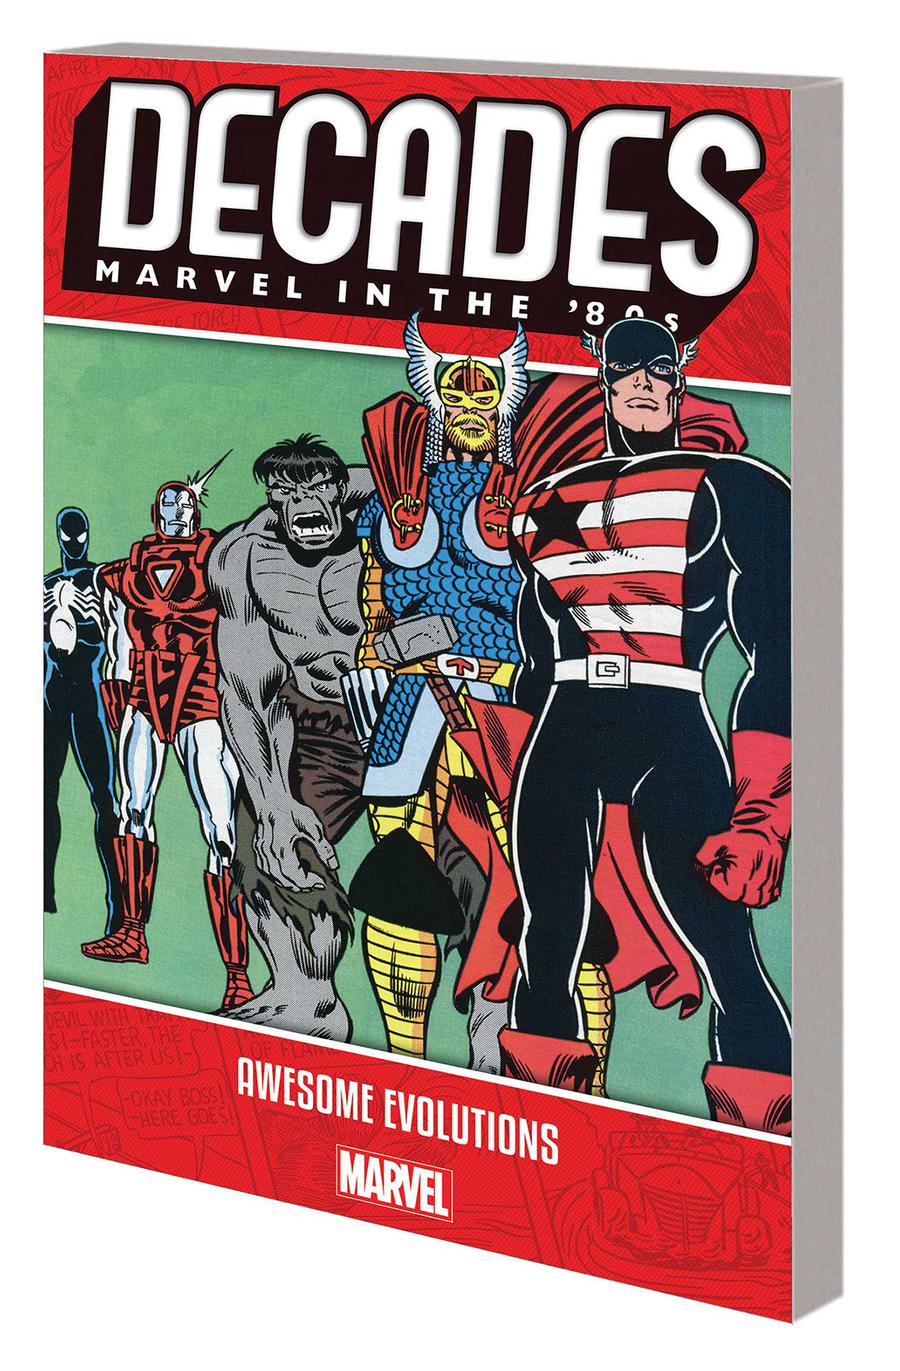 Decades Marvel In The 80s Awesome Evolutions TP